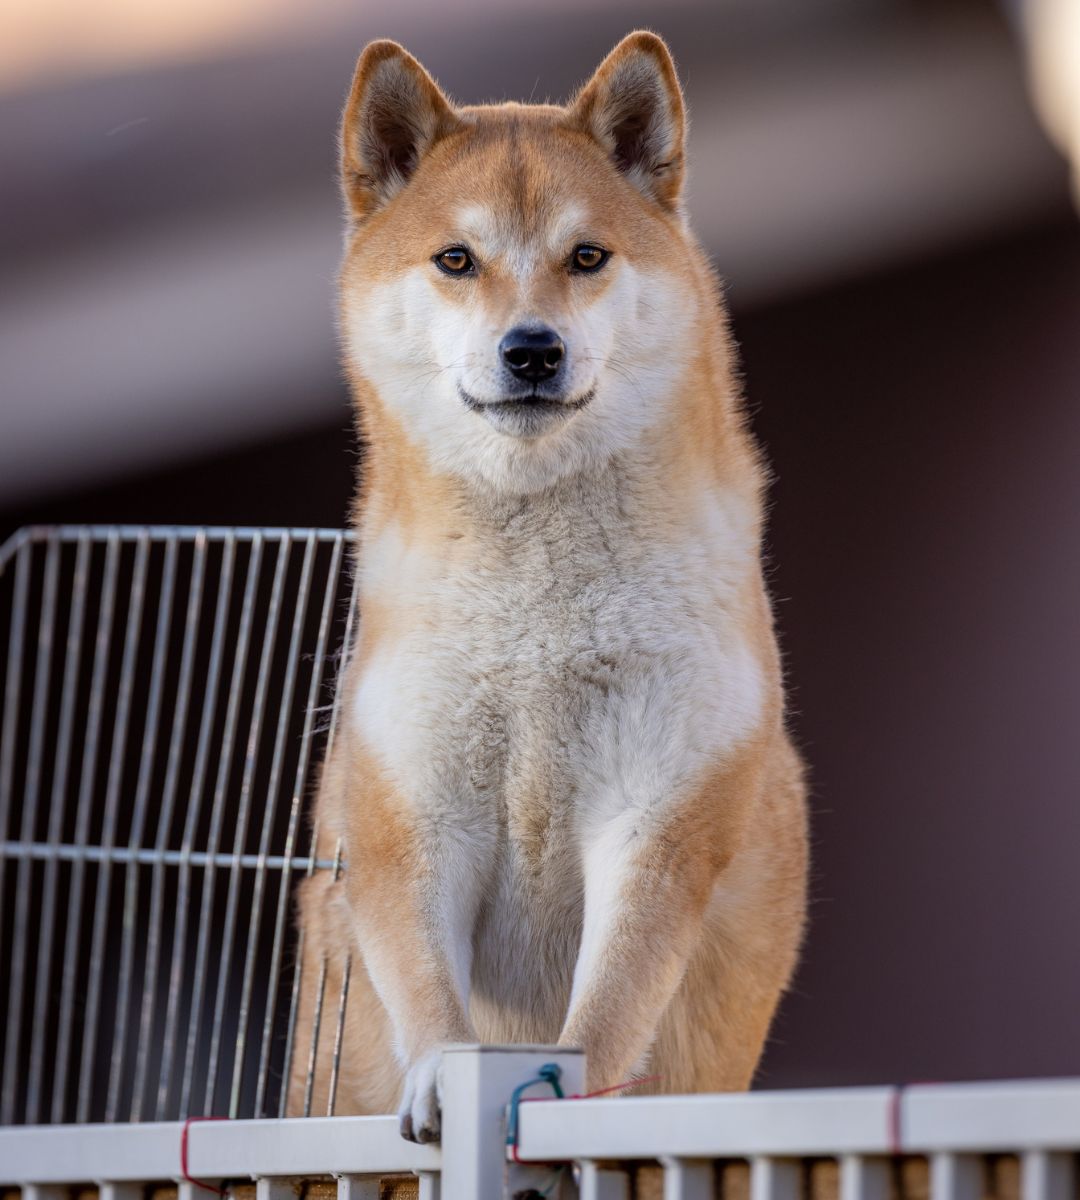 a dog standing on a metal fence